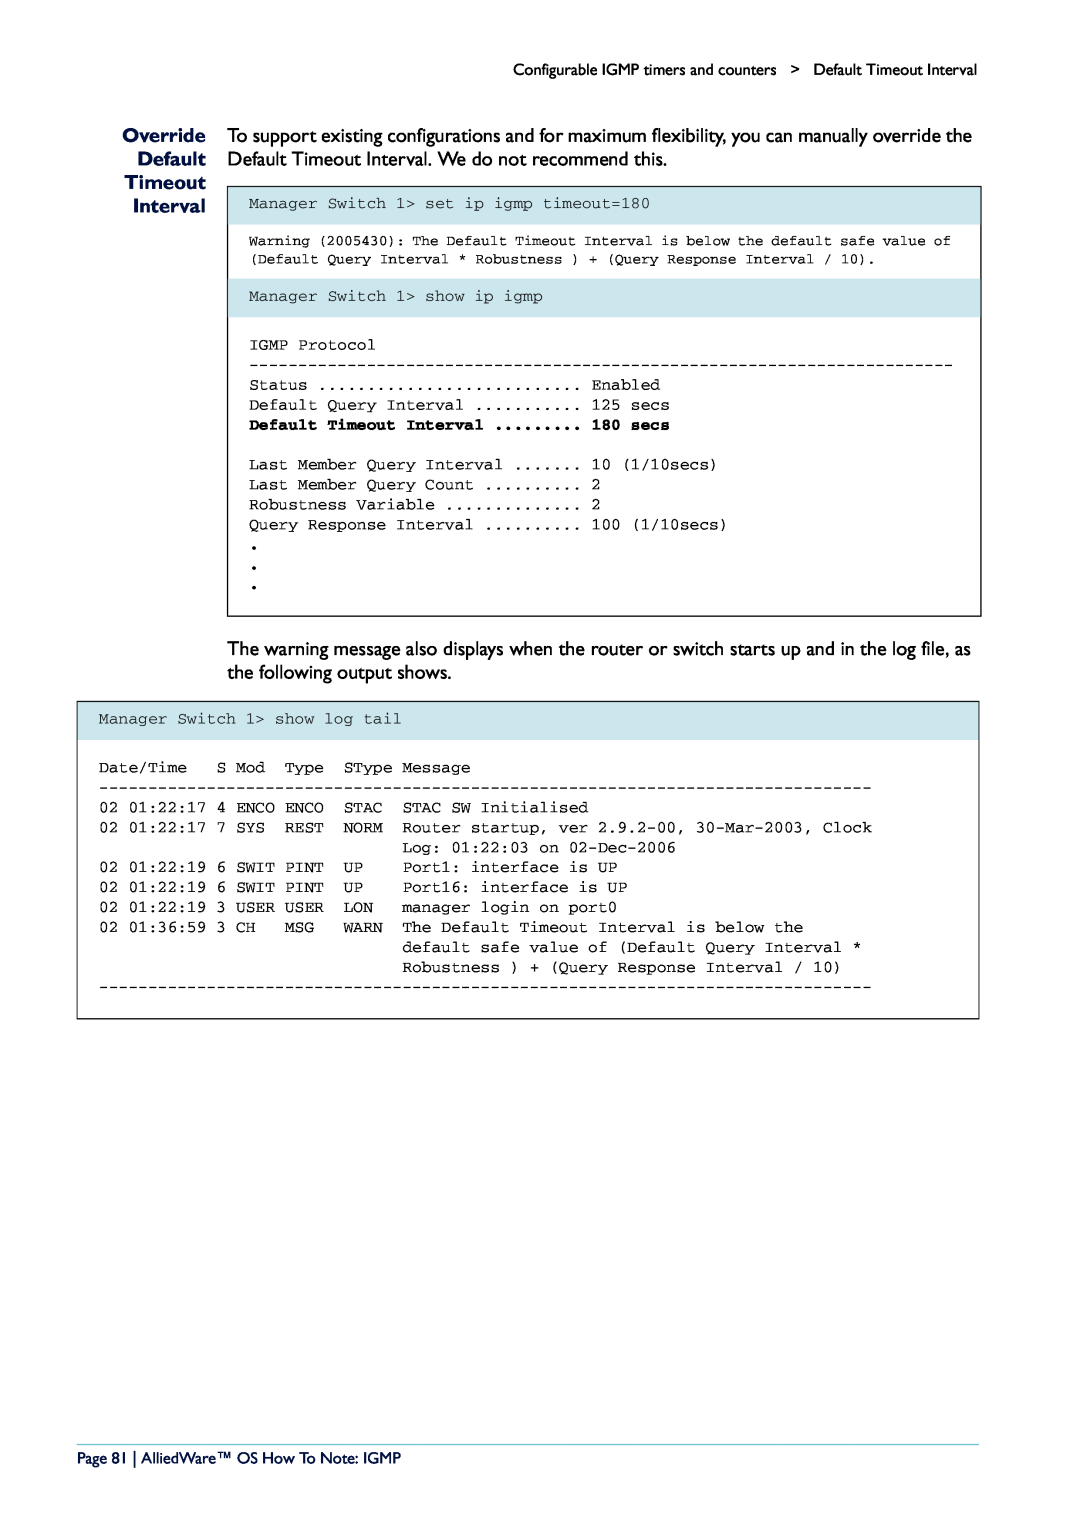 Allied Telesis AR400 manual Override Default Timeout Interval, Page 81 AlliedWare OS How To Note IGMP 